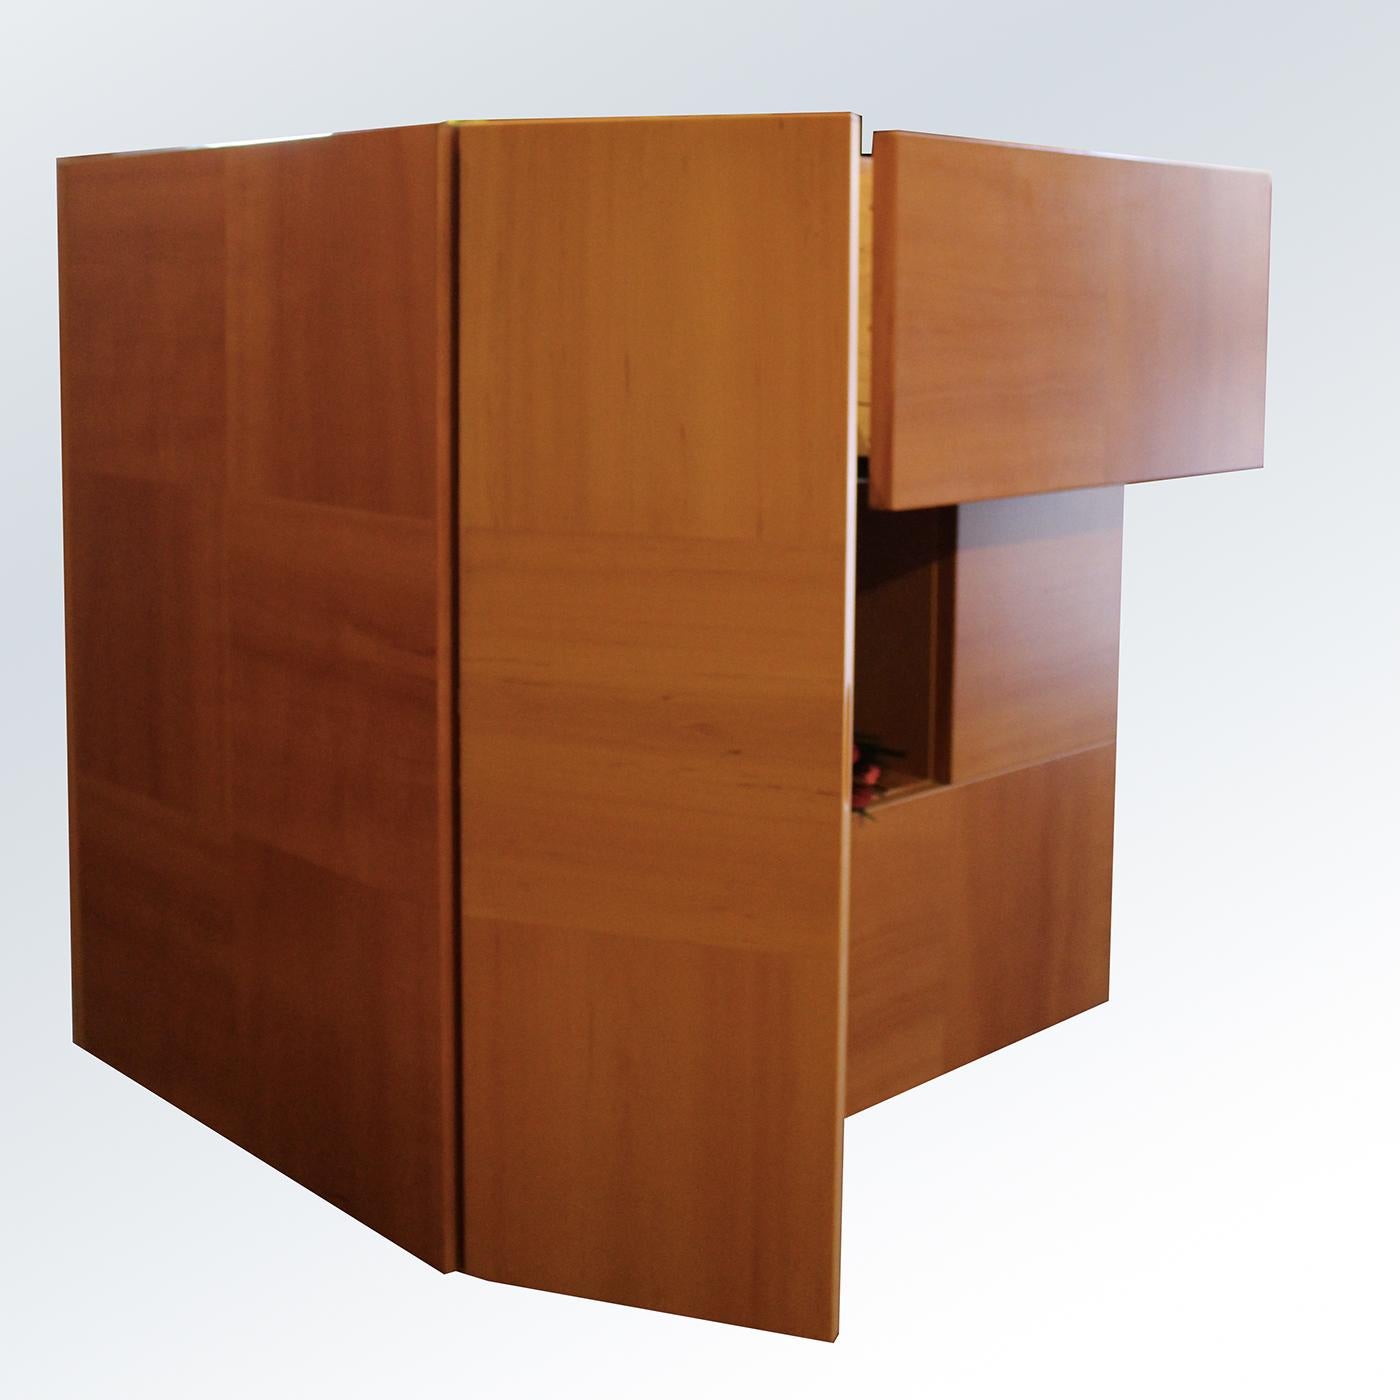 This striking sideboard features pure geometric shapes and an elegant modern look. The slightly elongated square Silhouette is enriched by a striking squared panelling all around its surface. Three practical drawers and one door make this piece